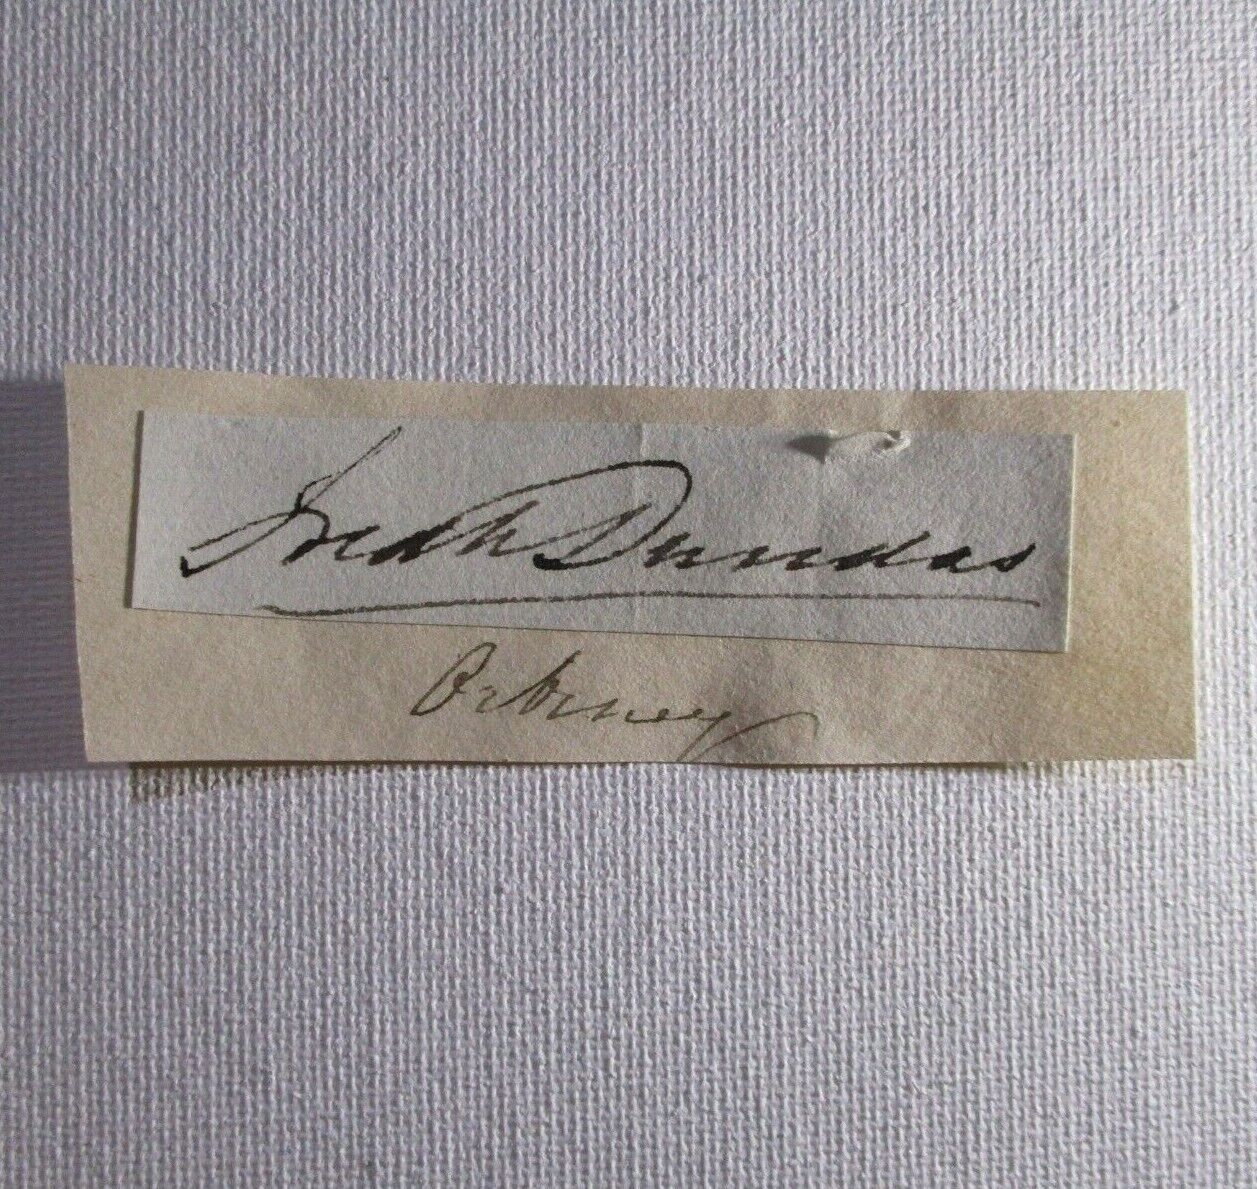 Rear Admiral George Dundas, Autograph, Signed Auto, 1778-1834 Royal Navy officer